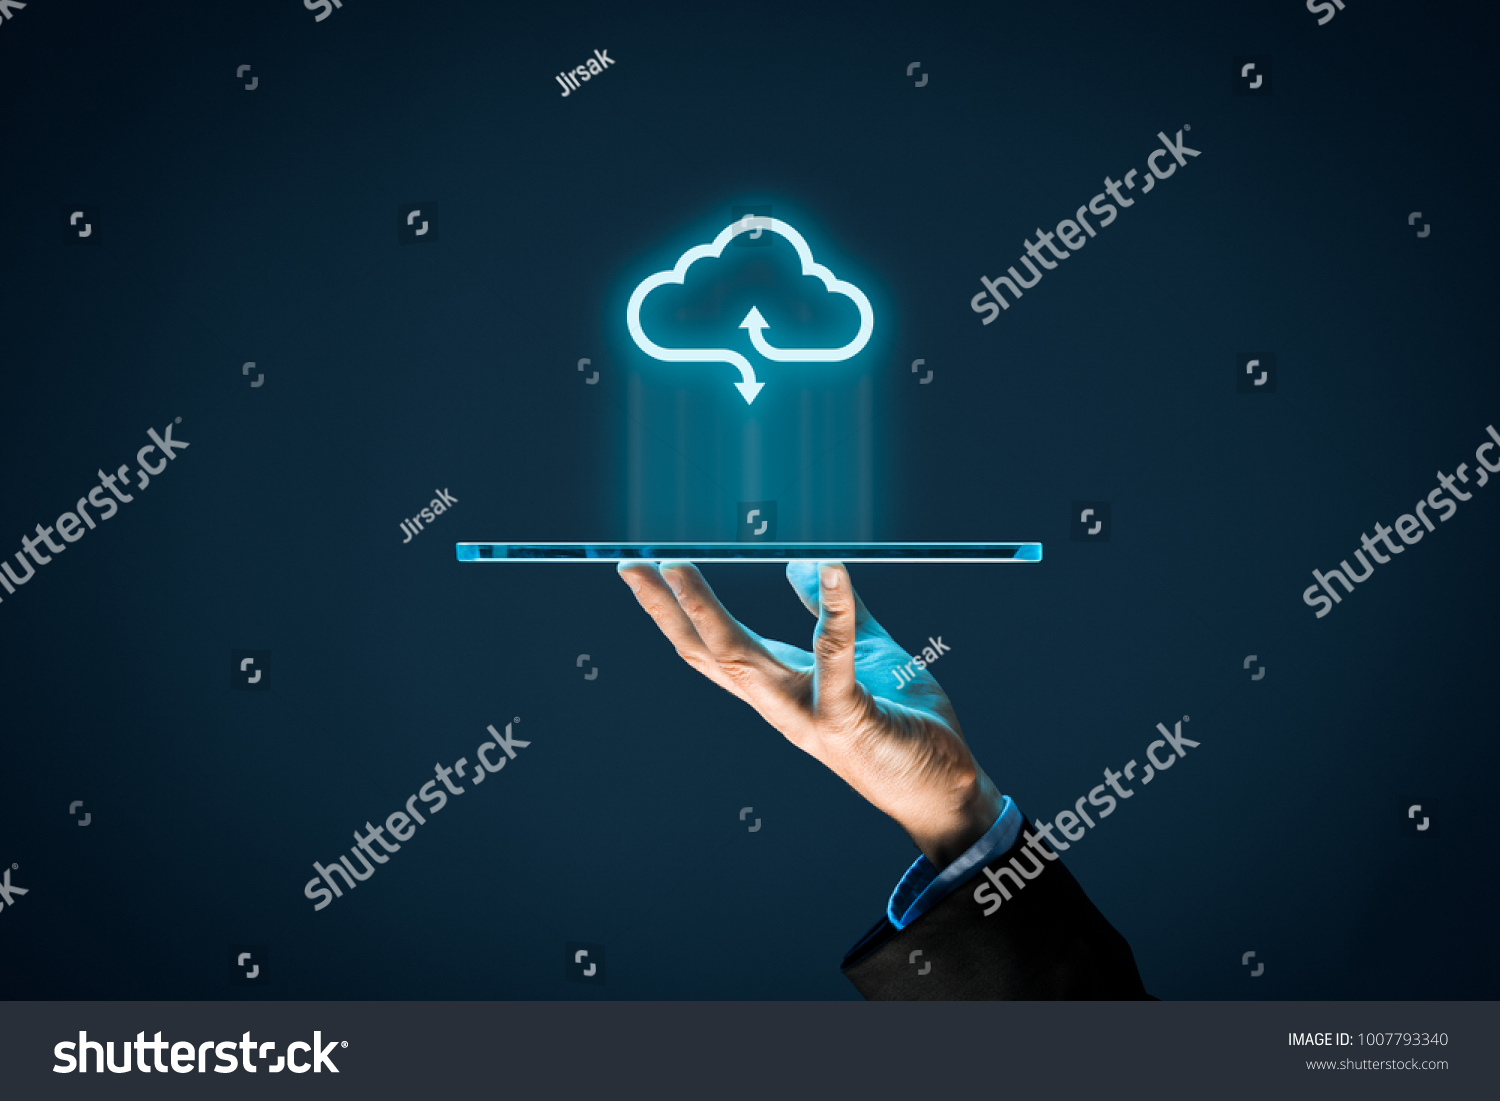 Cloud computing concept - connect devices to cloud. Businessman or information technologist with cloud computing icon and tablet. #1007793340